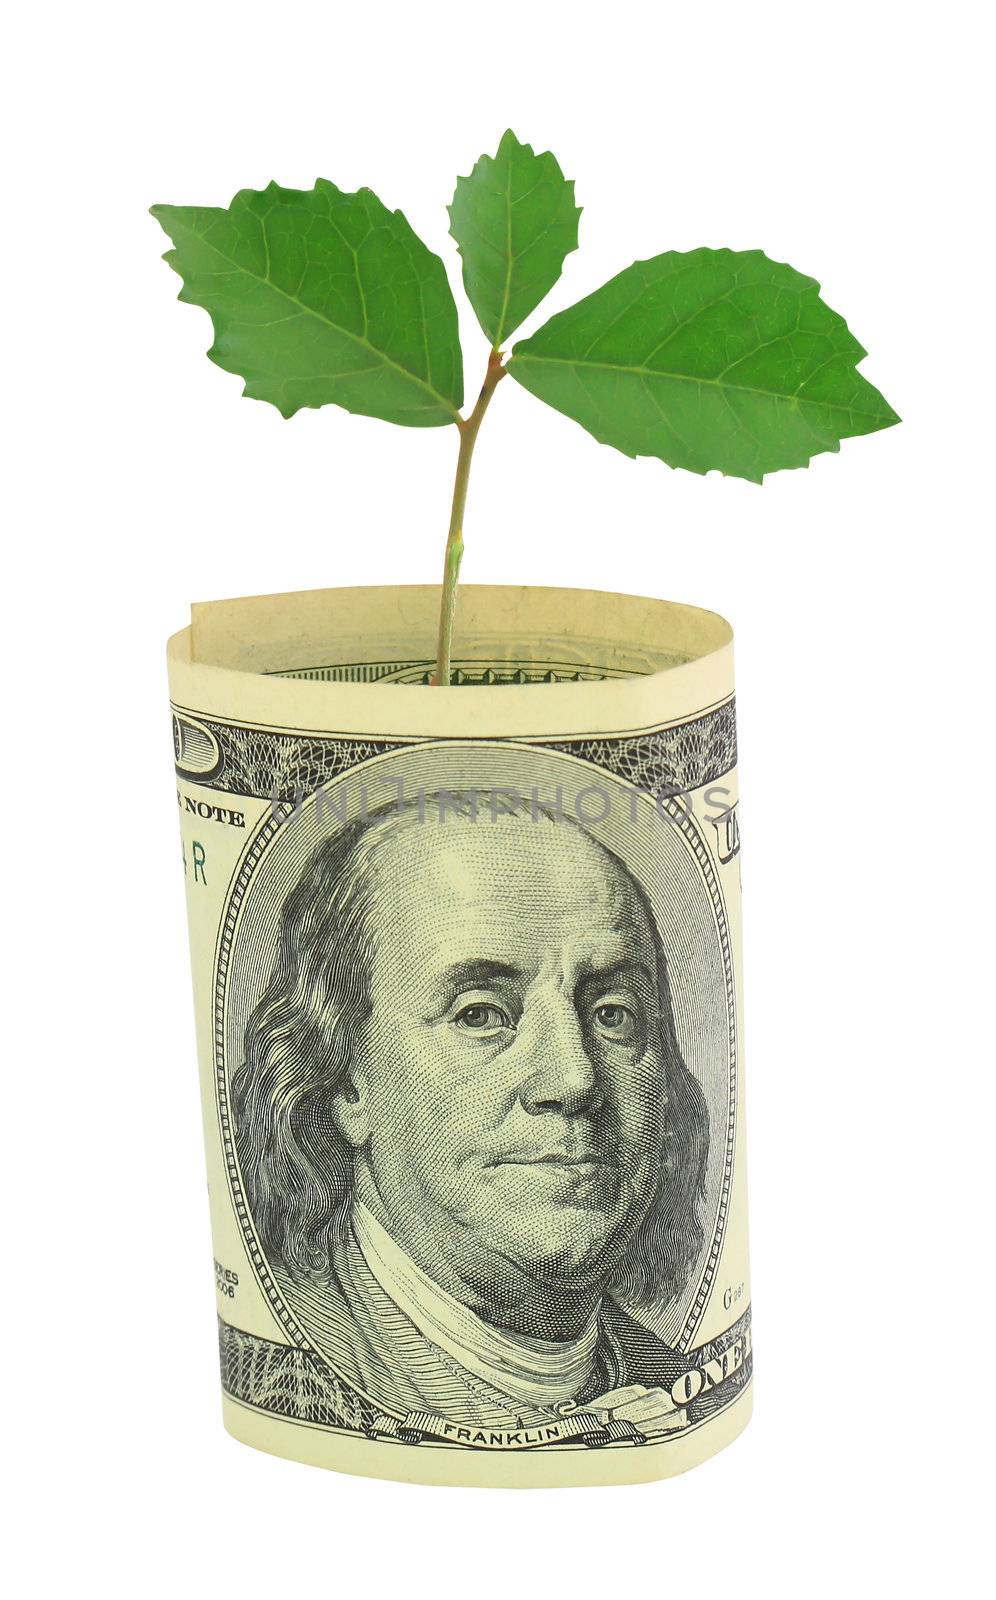 Tree growing from dollar bill by rufous